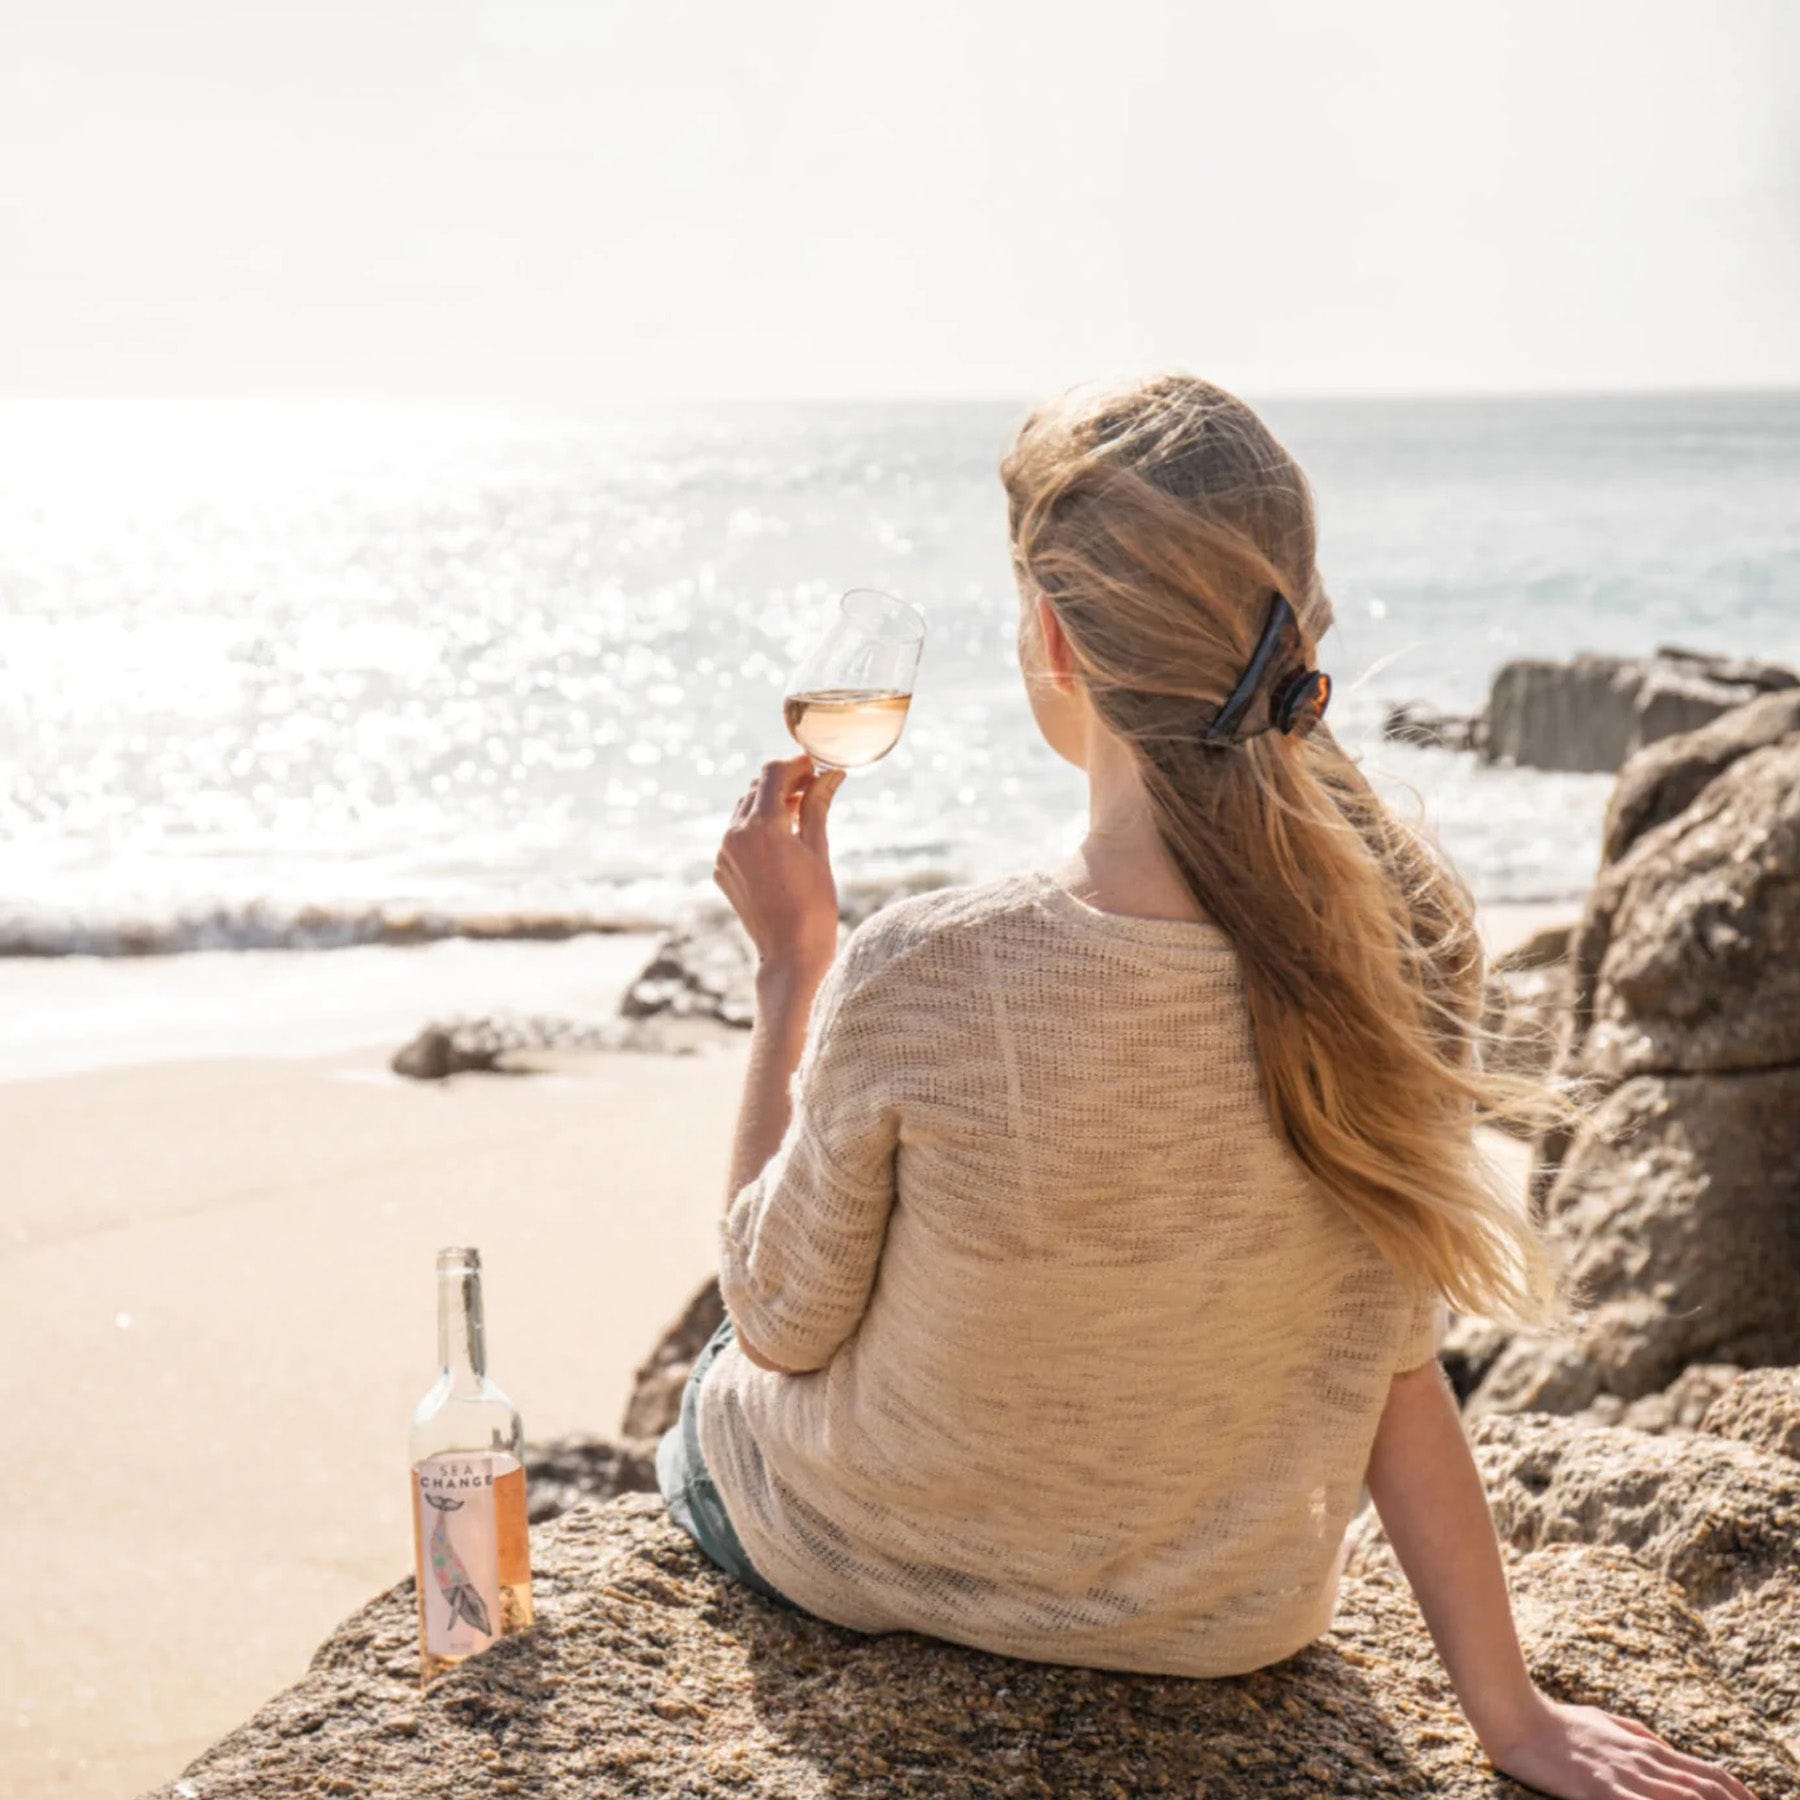 Woman sitting on beach rocks holding wine glass, ocean view, sunny day, relaxation concept, bottle of rose wine next to her